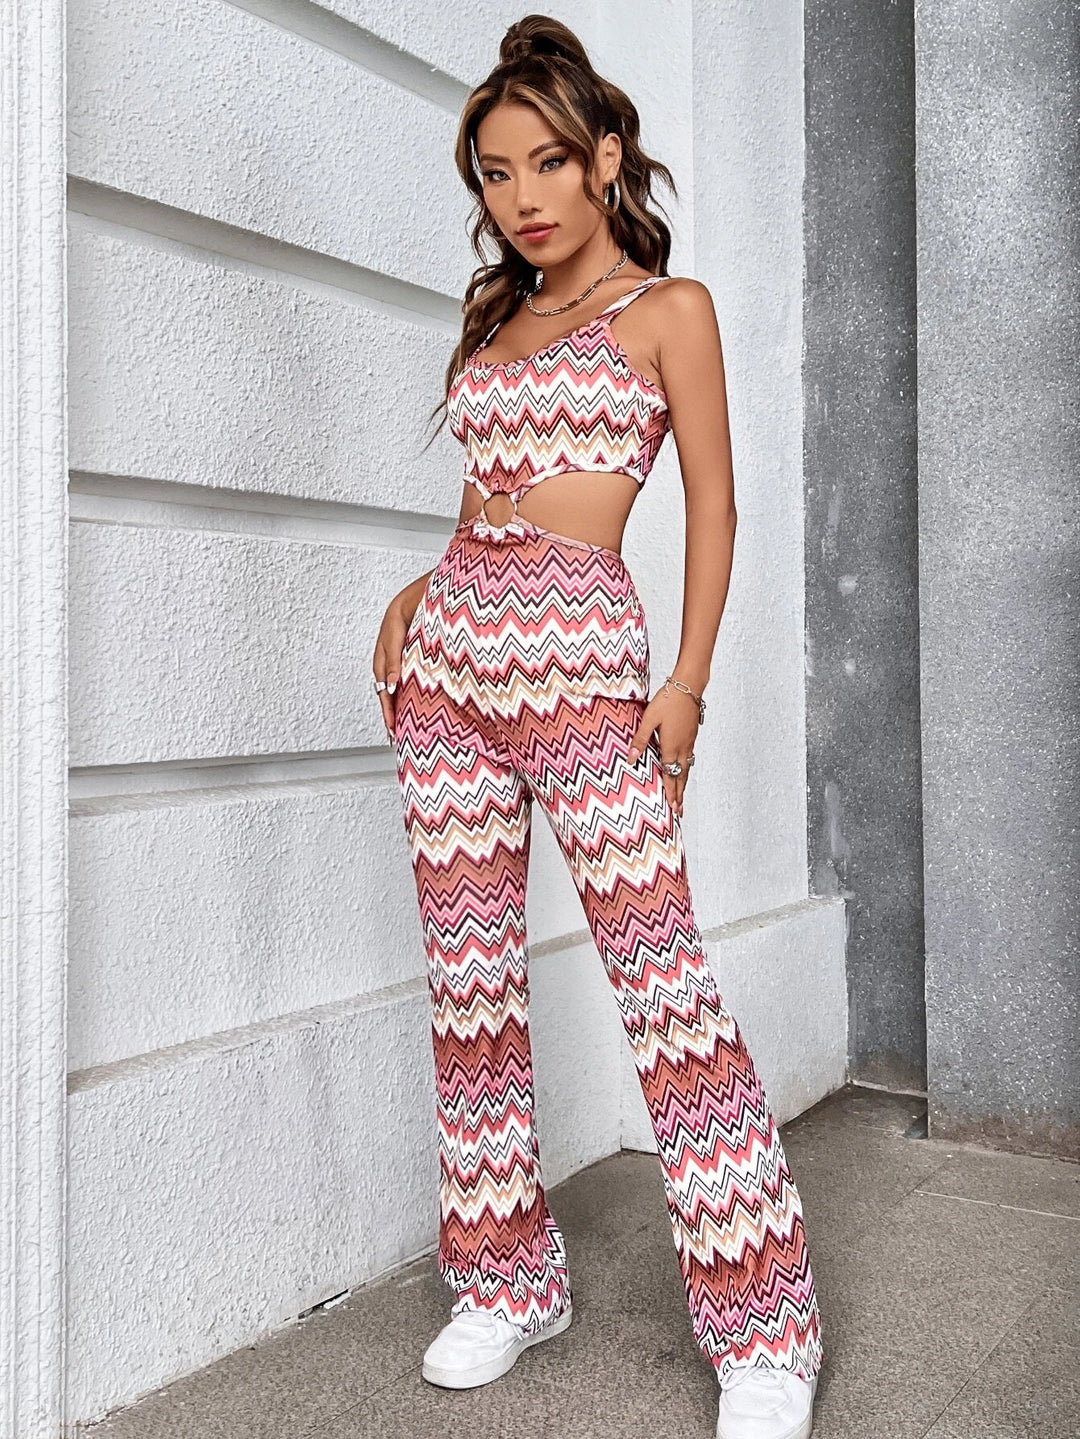 Chevron Print Ring Linked Cut Out Cami Jumpsuit